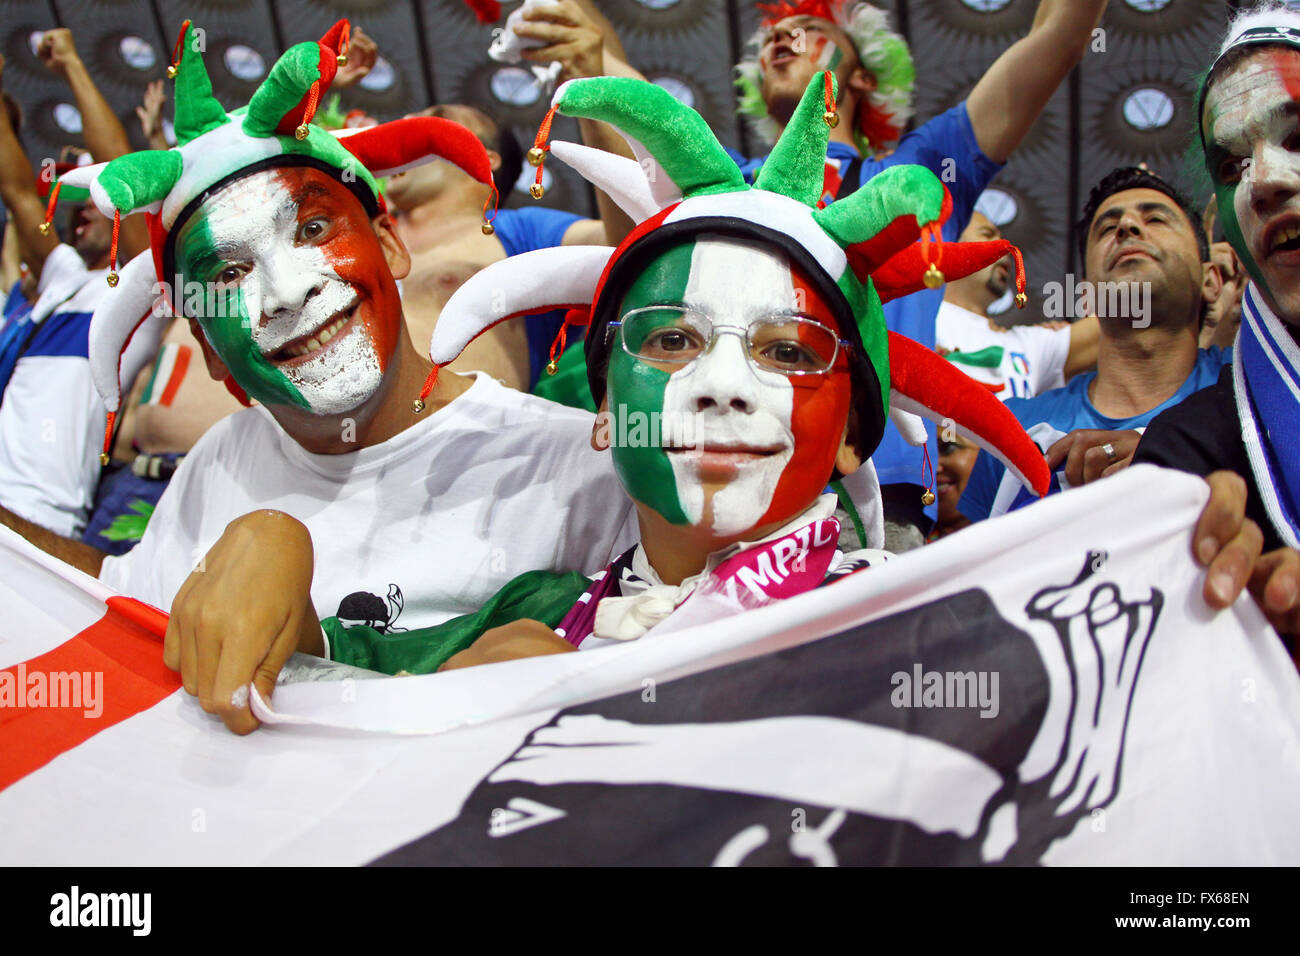 KYIV, UKRAINE - JULY 1, 2012: Italy national football team supporters show their support during UEFA EURO 2012 Championship fina Stock Photo